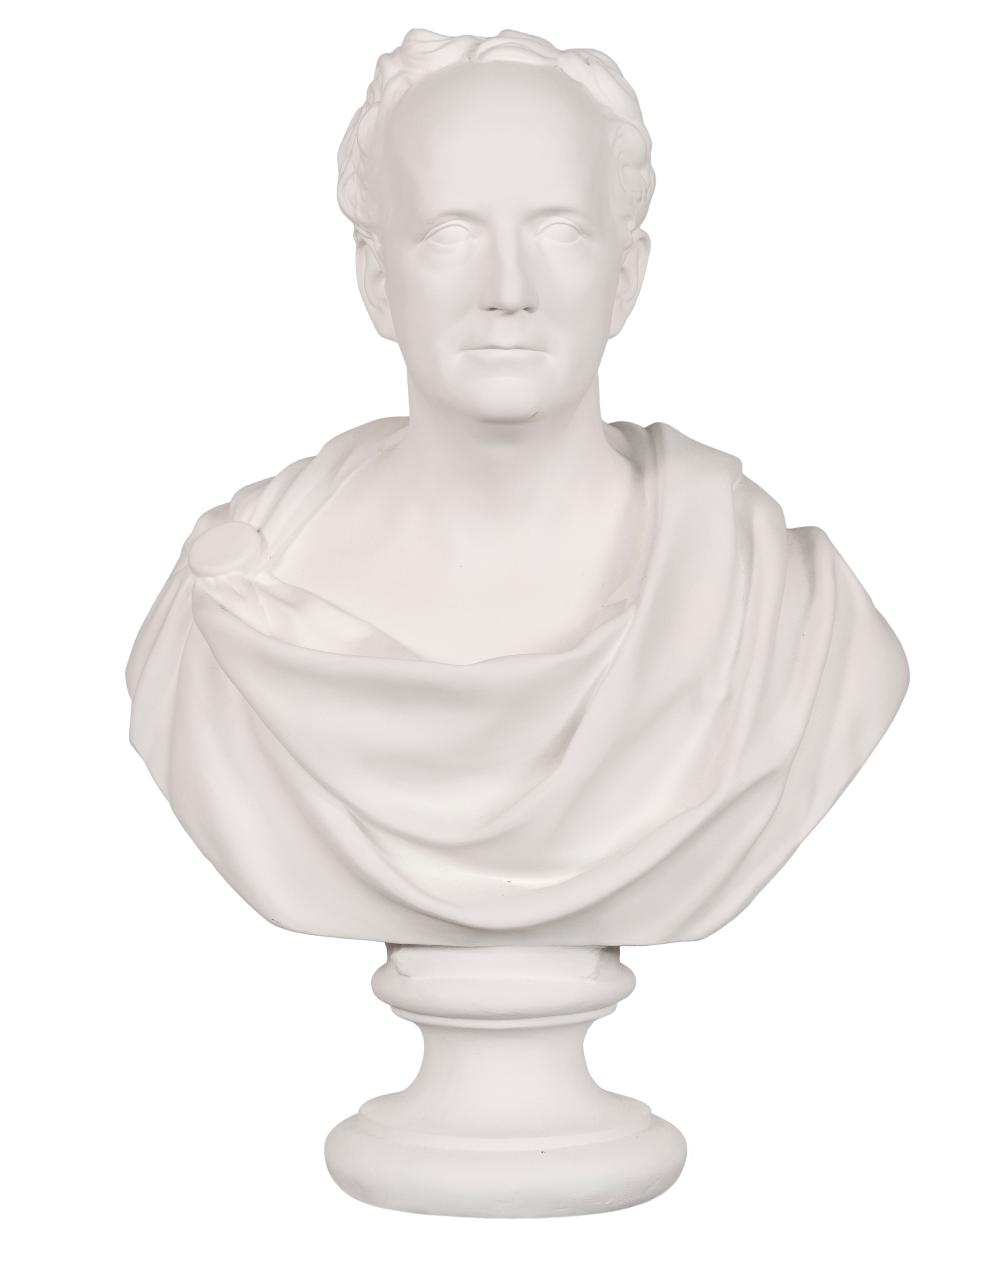 CAST PLASTER BUST OF A MAN LATE